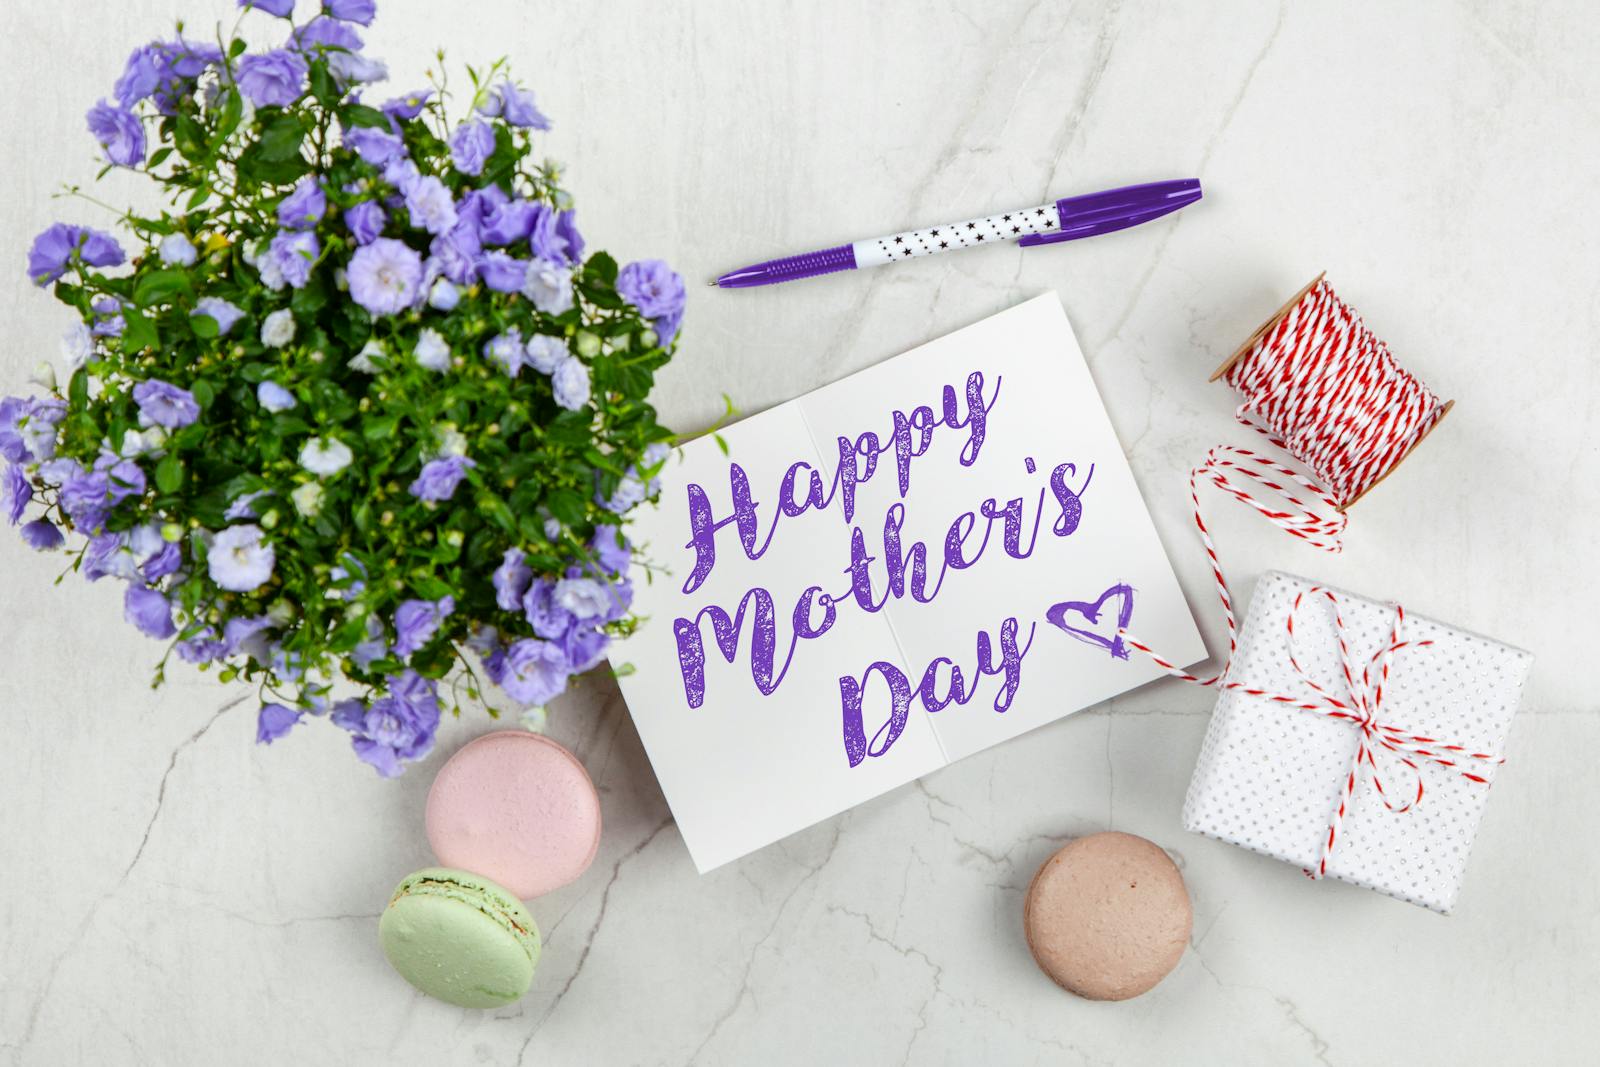 Happy Mothers Day from all of us at the Bettina Reid Group